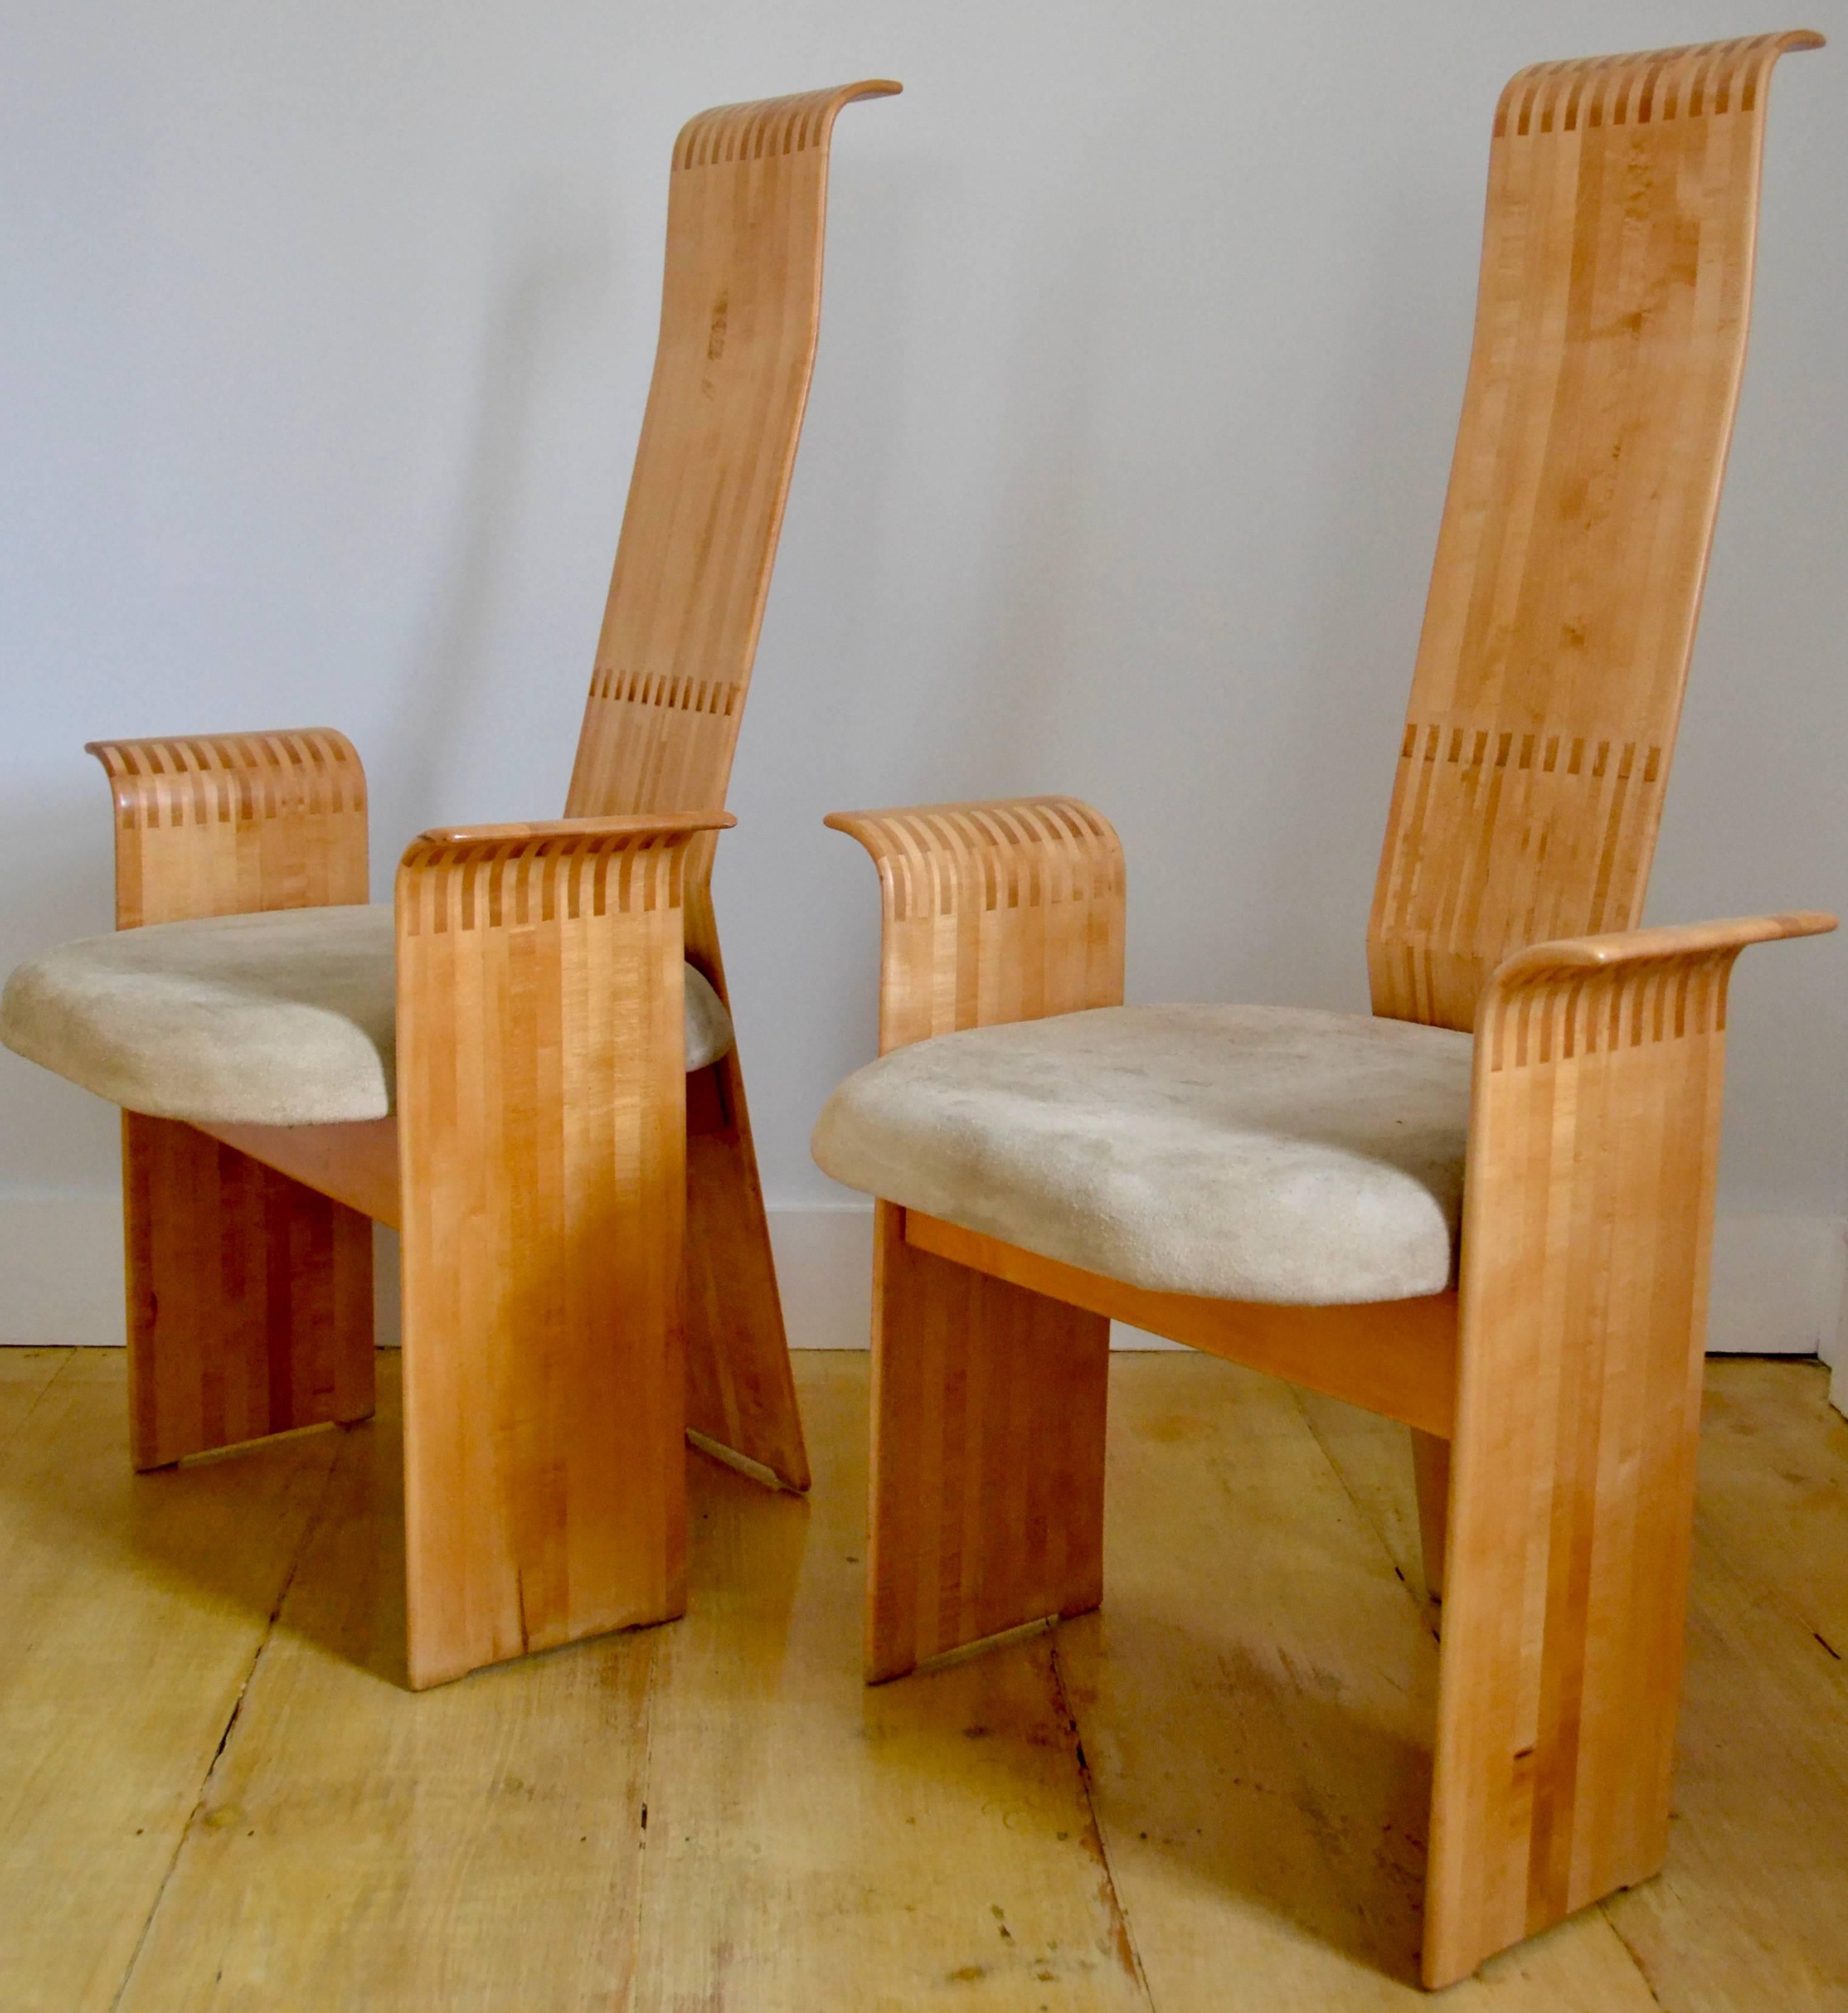 Berthold Schwaiger Studio Crafted Laminated Chairs Signed and Dated 1985  3